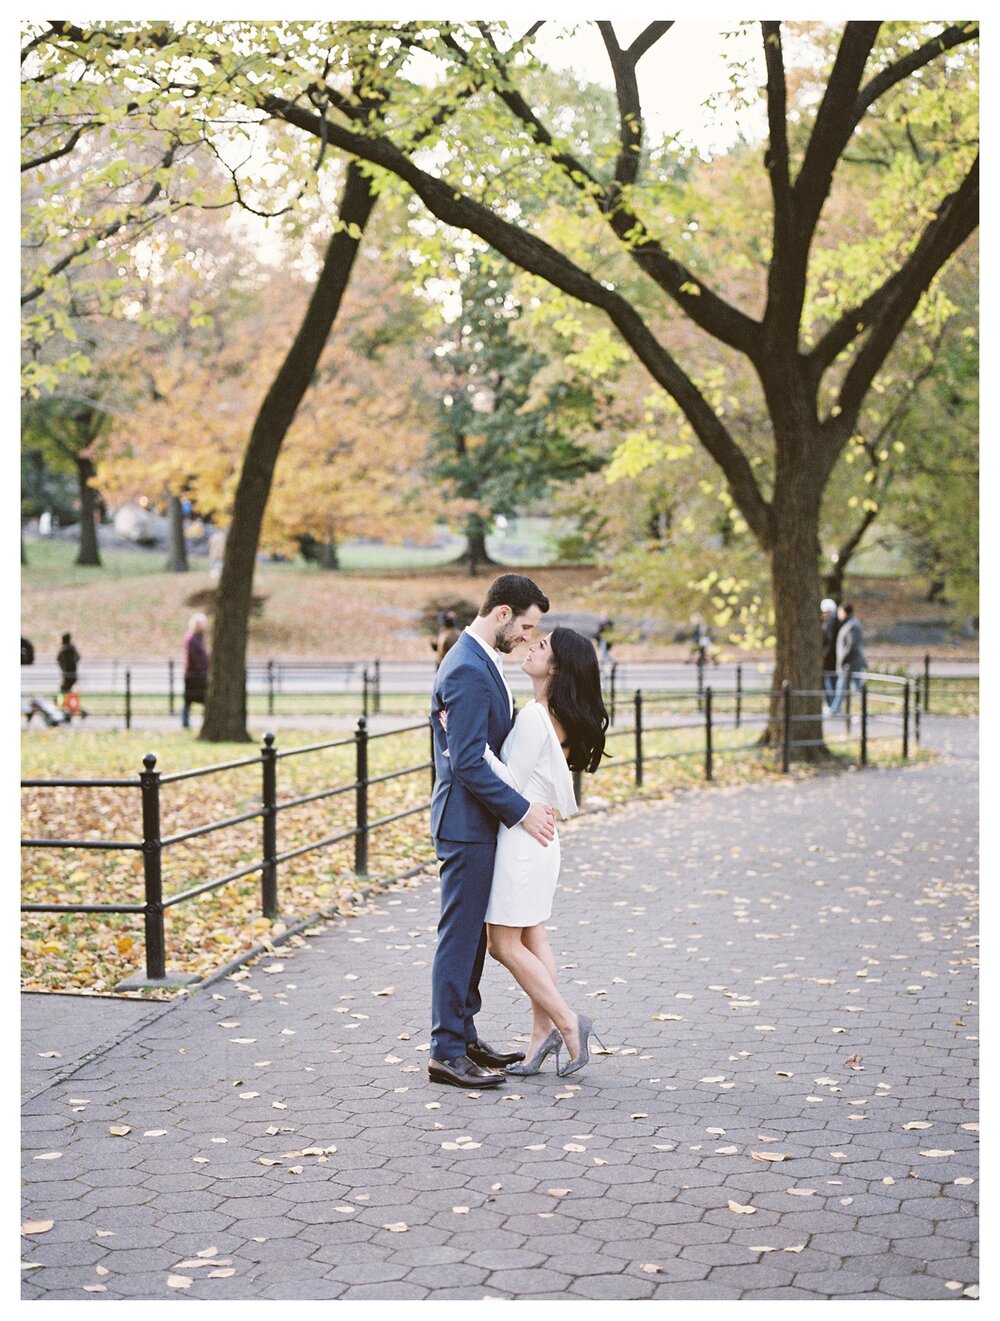  Fall in central park new york engagement session 